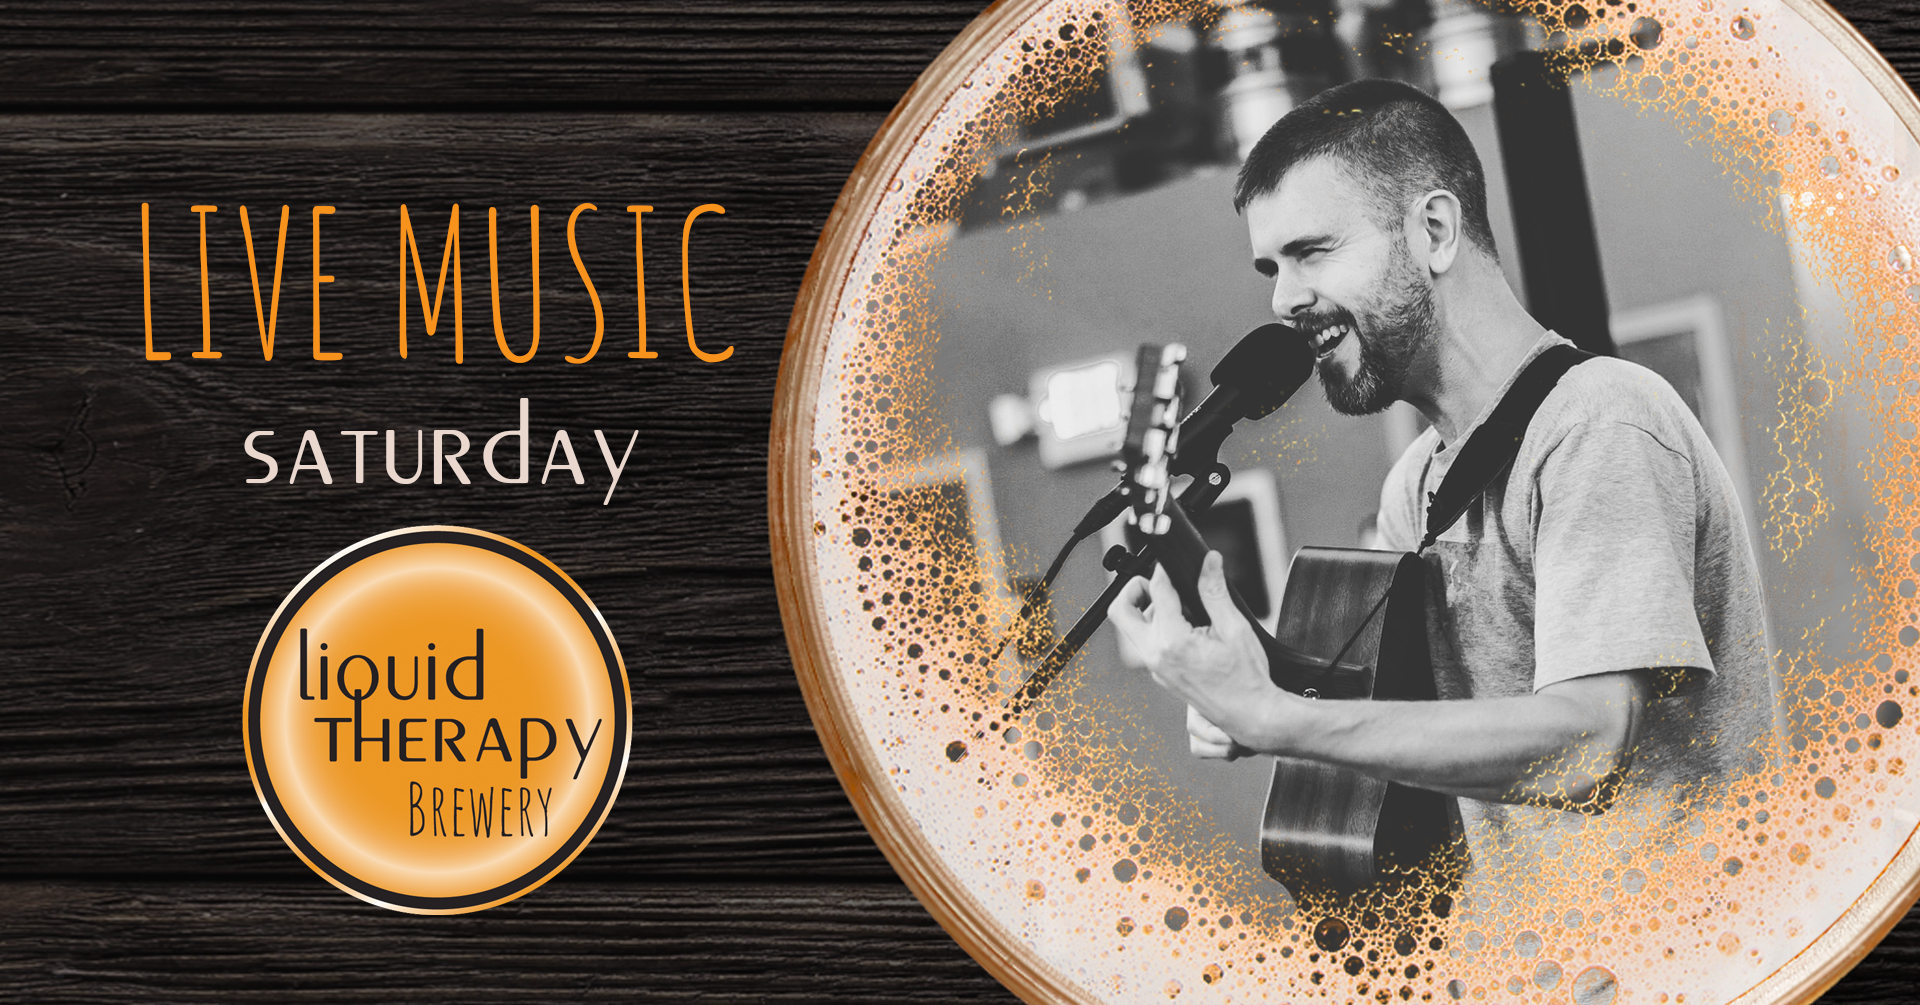 Live Music at Liquid Therapy Brewery - Jon Pond